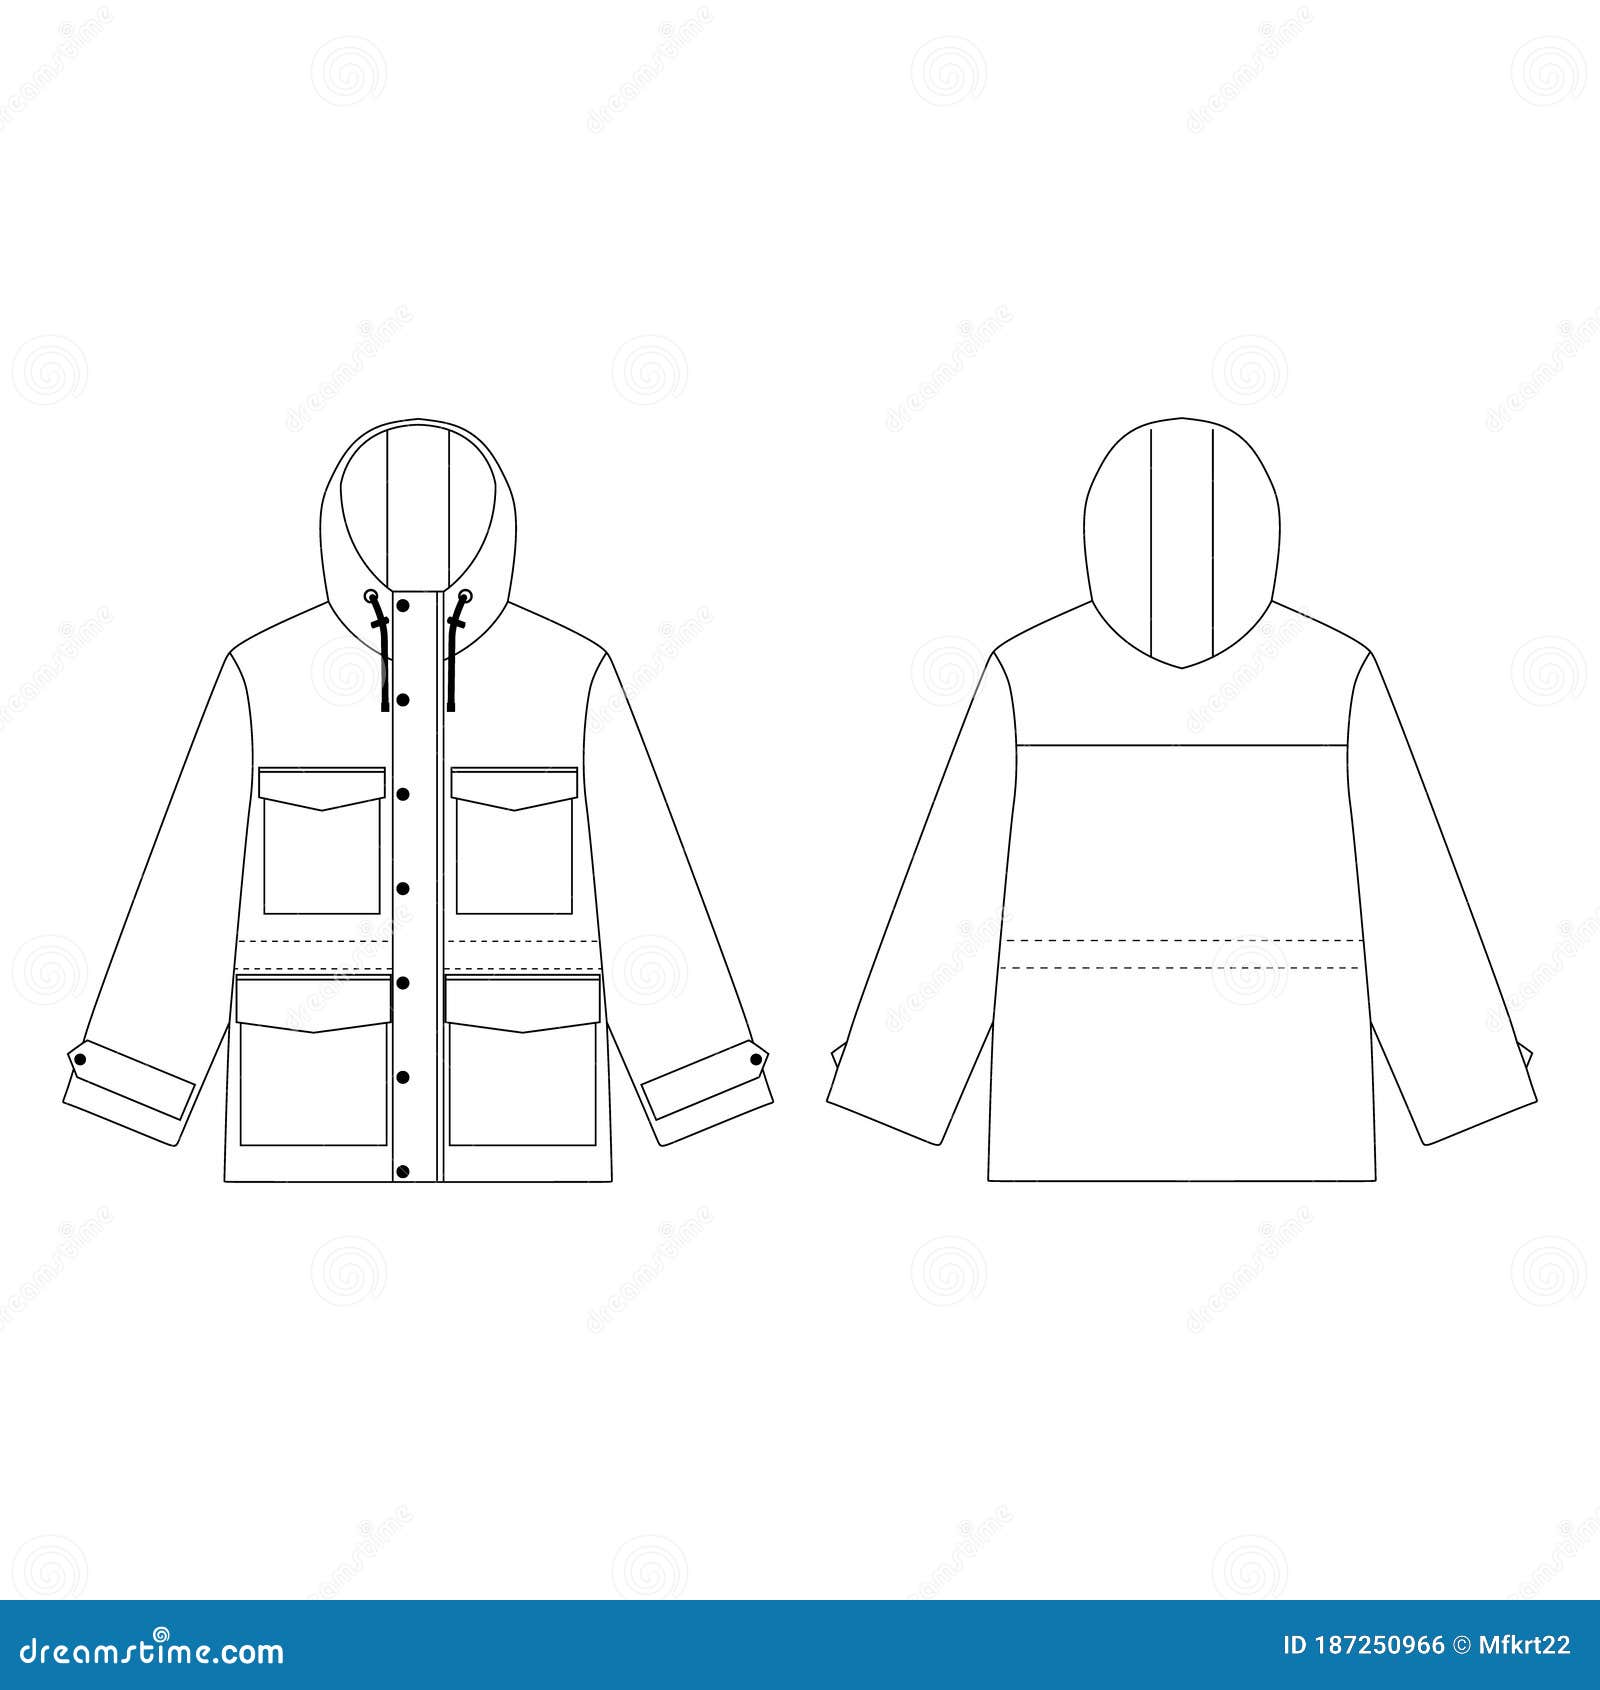  Parka  Jacket Template  Clip Art Collection Clothing Stock 